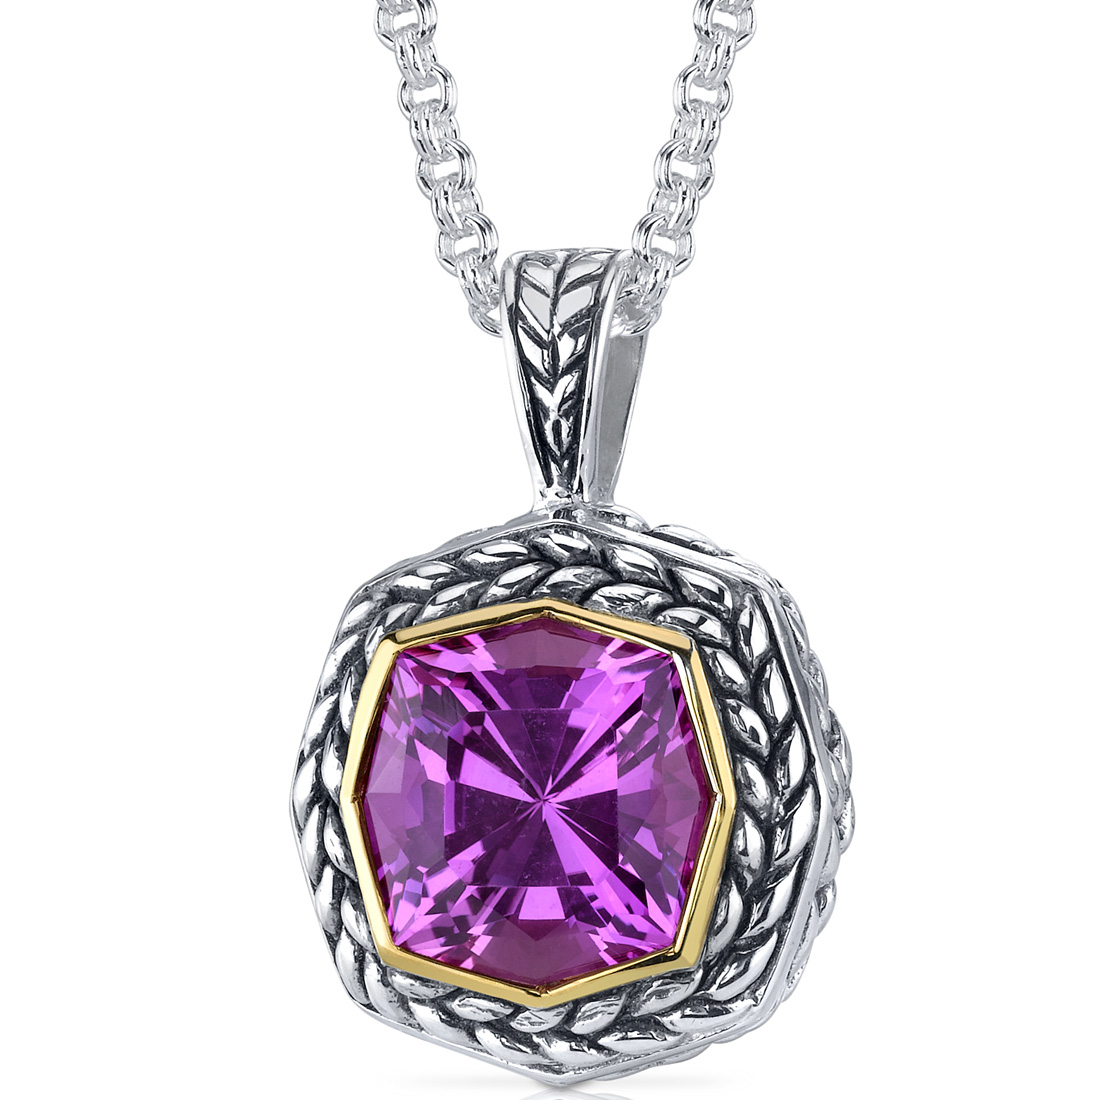 peora Octagon Cut 9.50 carat Pink Sapphire Sterling Silver Antique Style Pendant